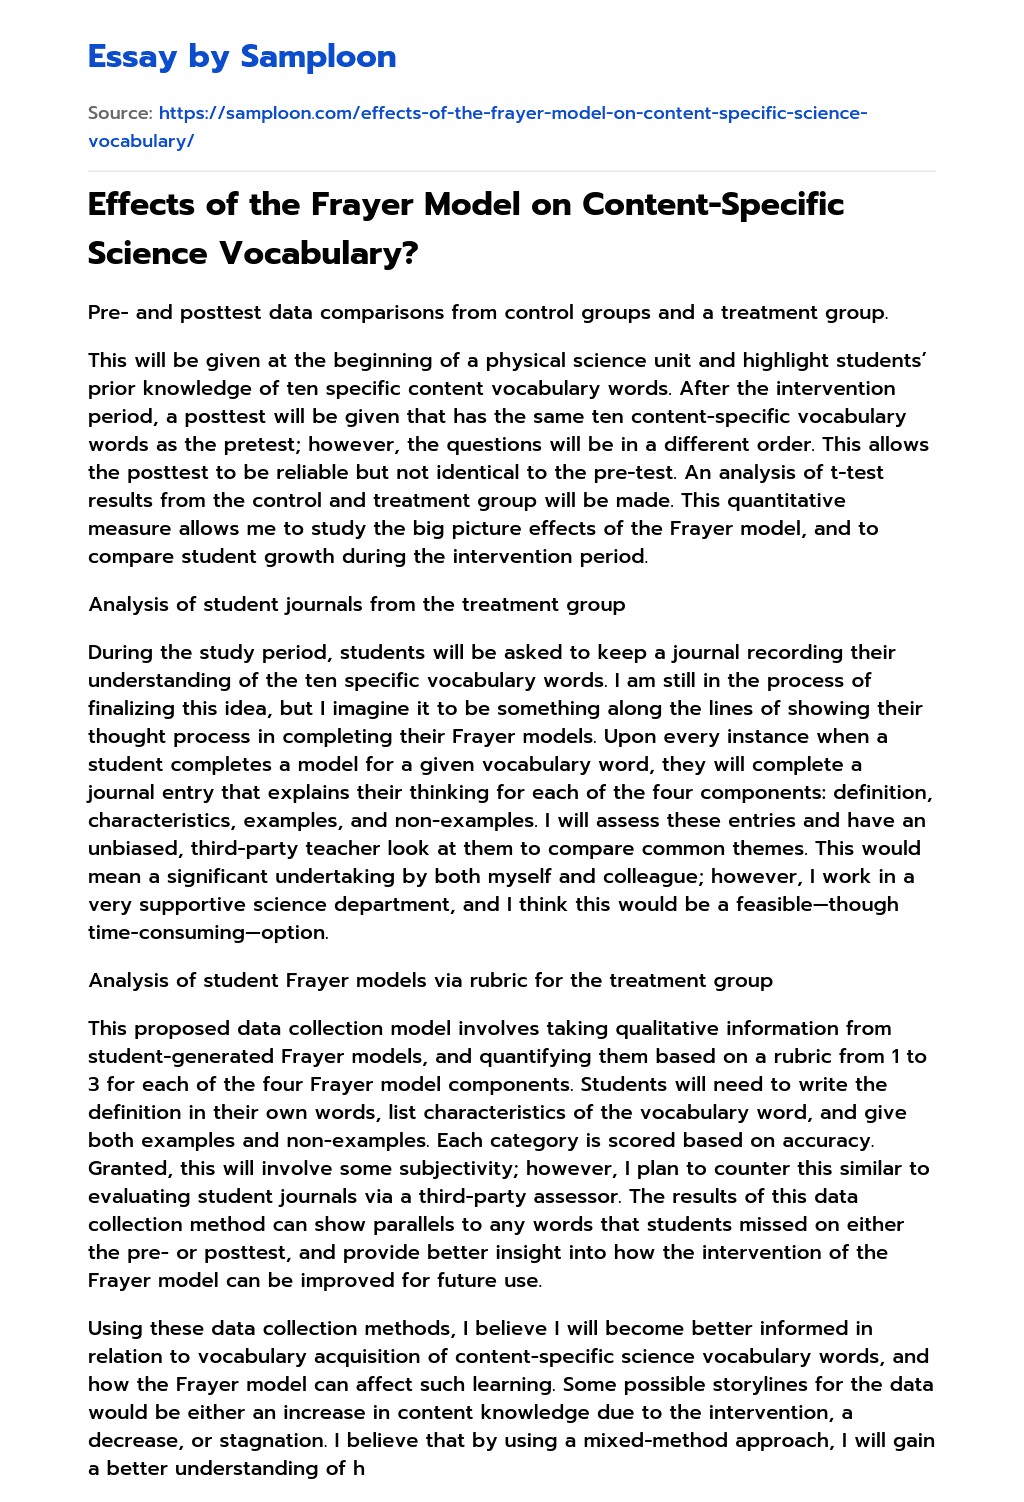 Effects of the Frayer Model on Content-Specific Science Vocabulary? essay